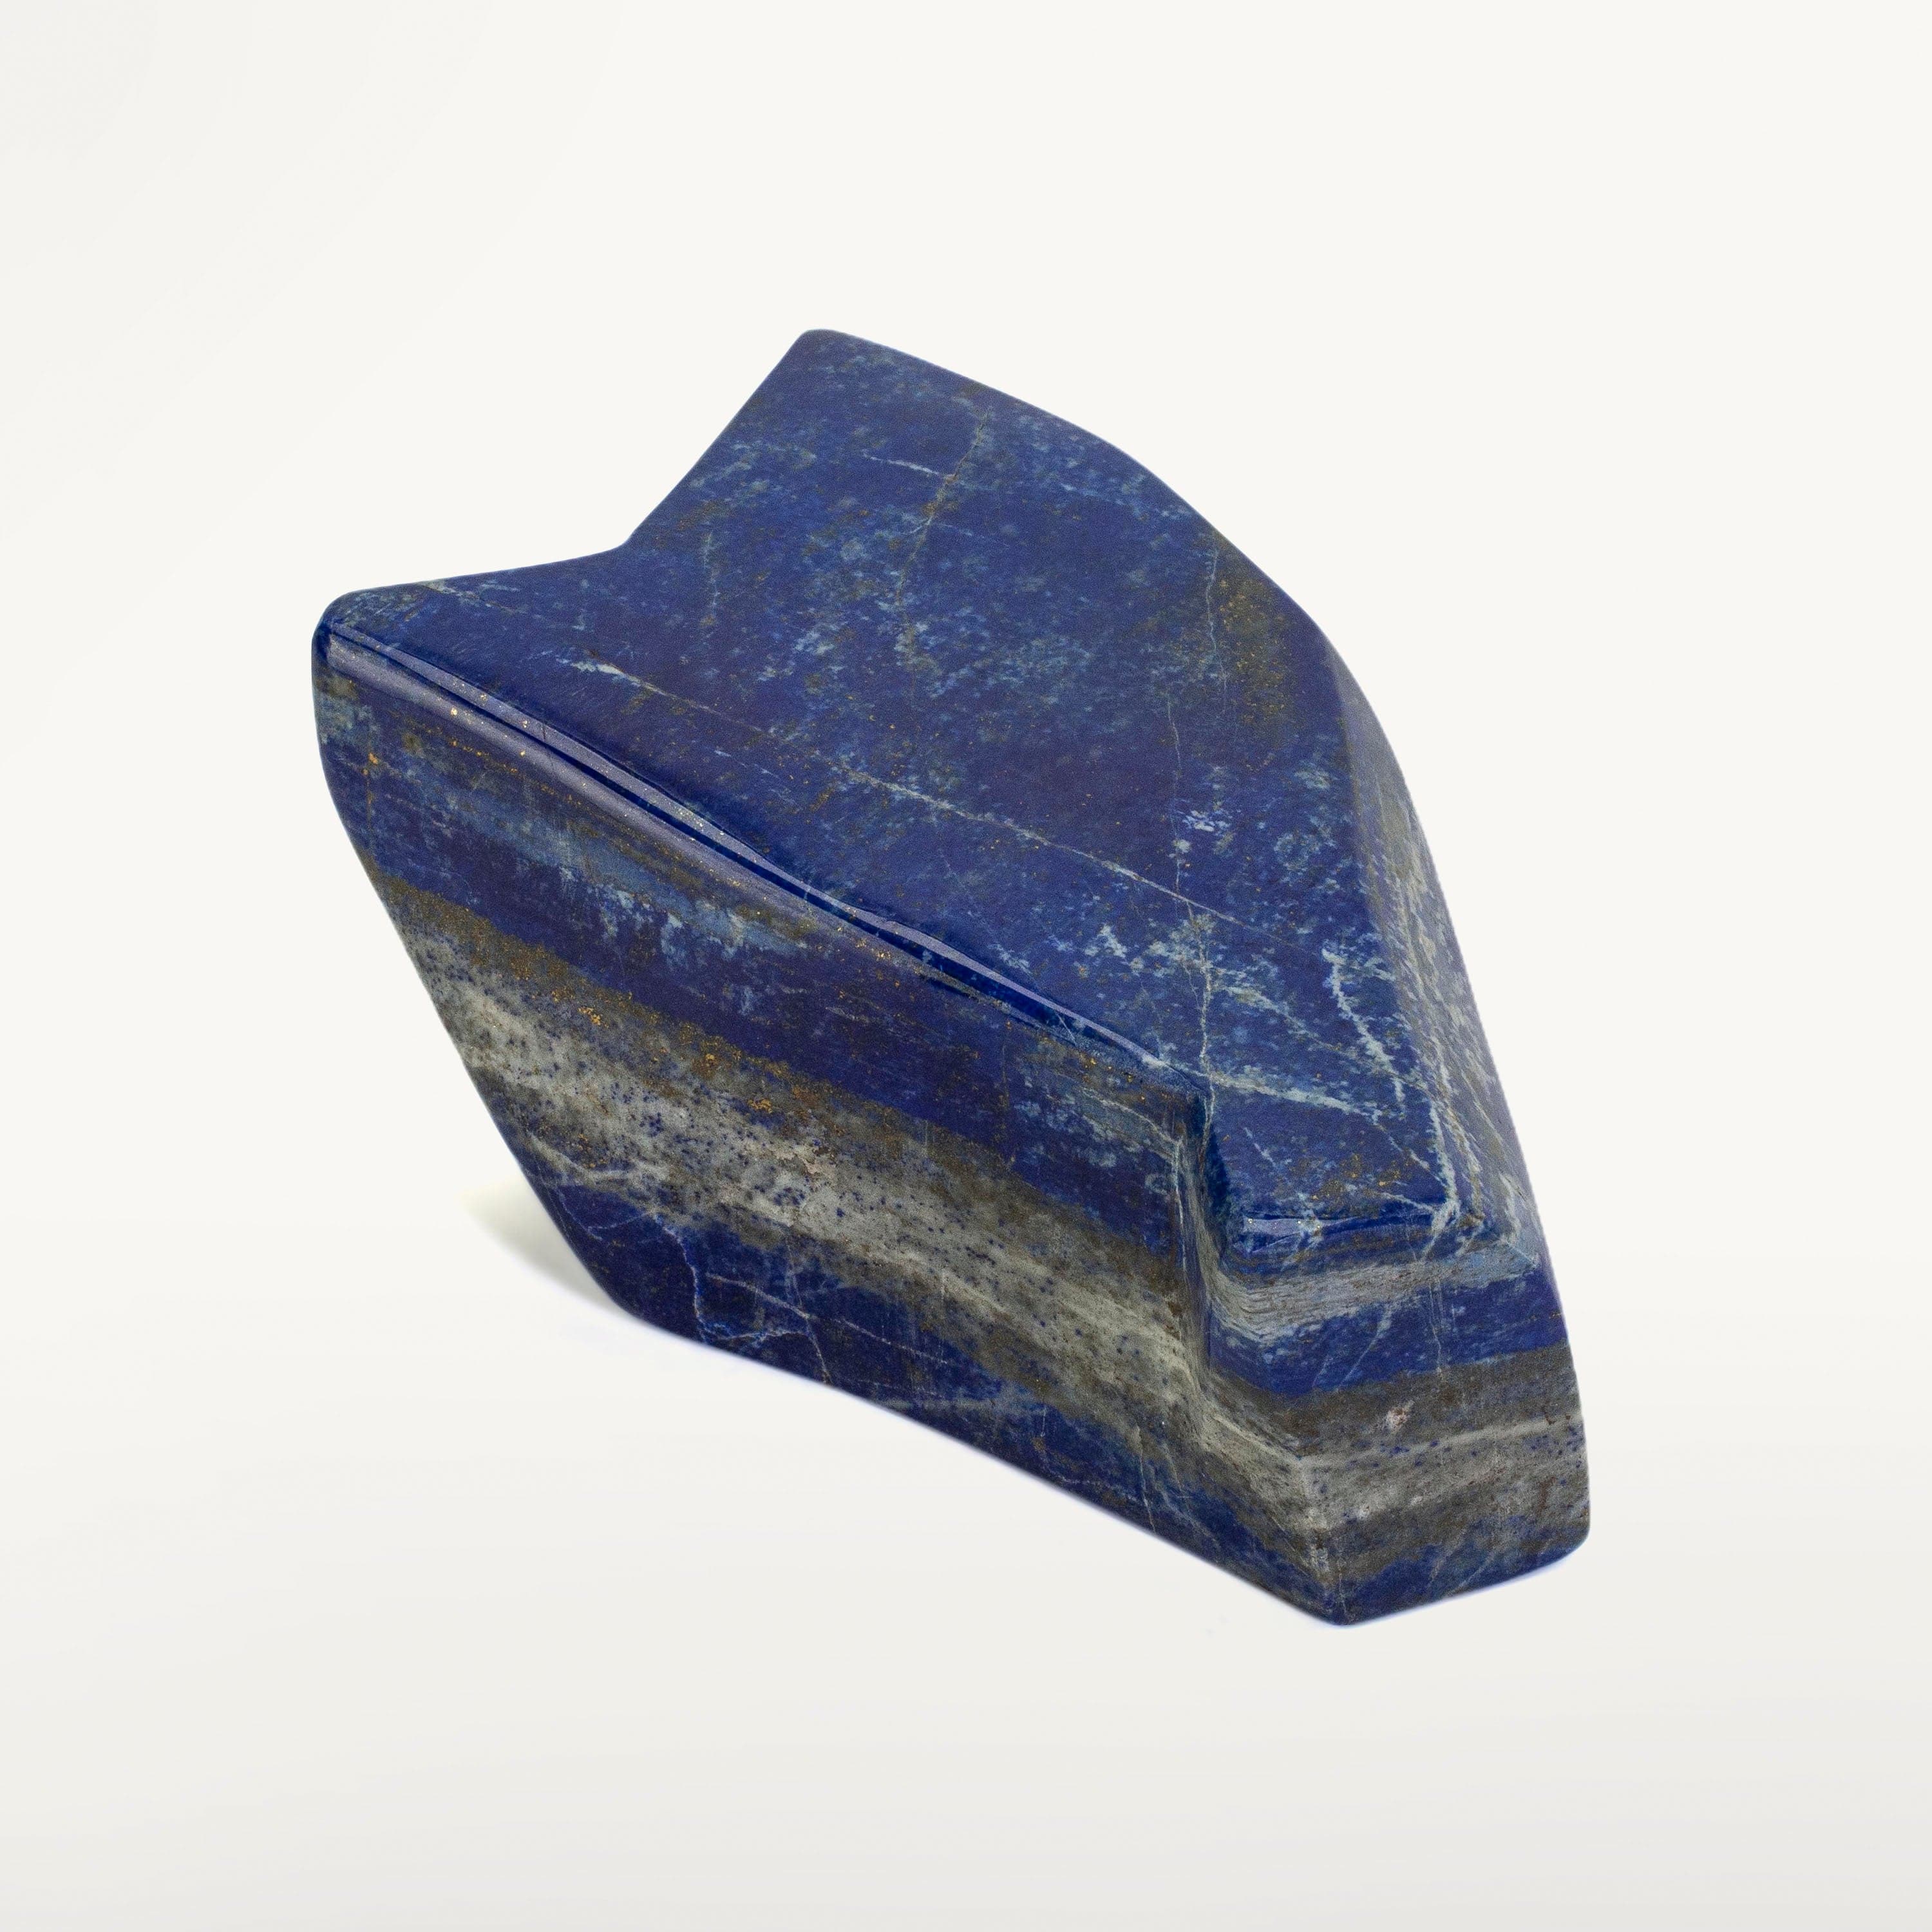 Kalifano Lapis Lapis Lazuil Freeform from Afghanistan - 1.3 kg / 2.8 lbs LP1400.003